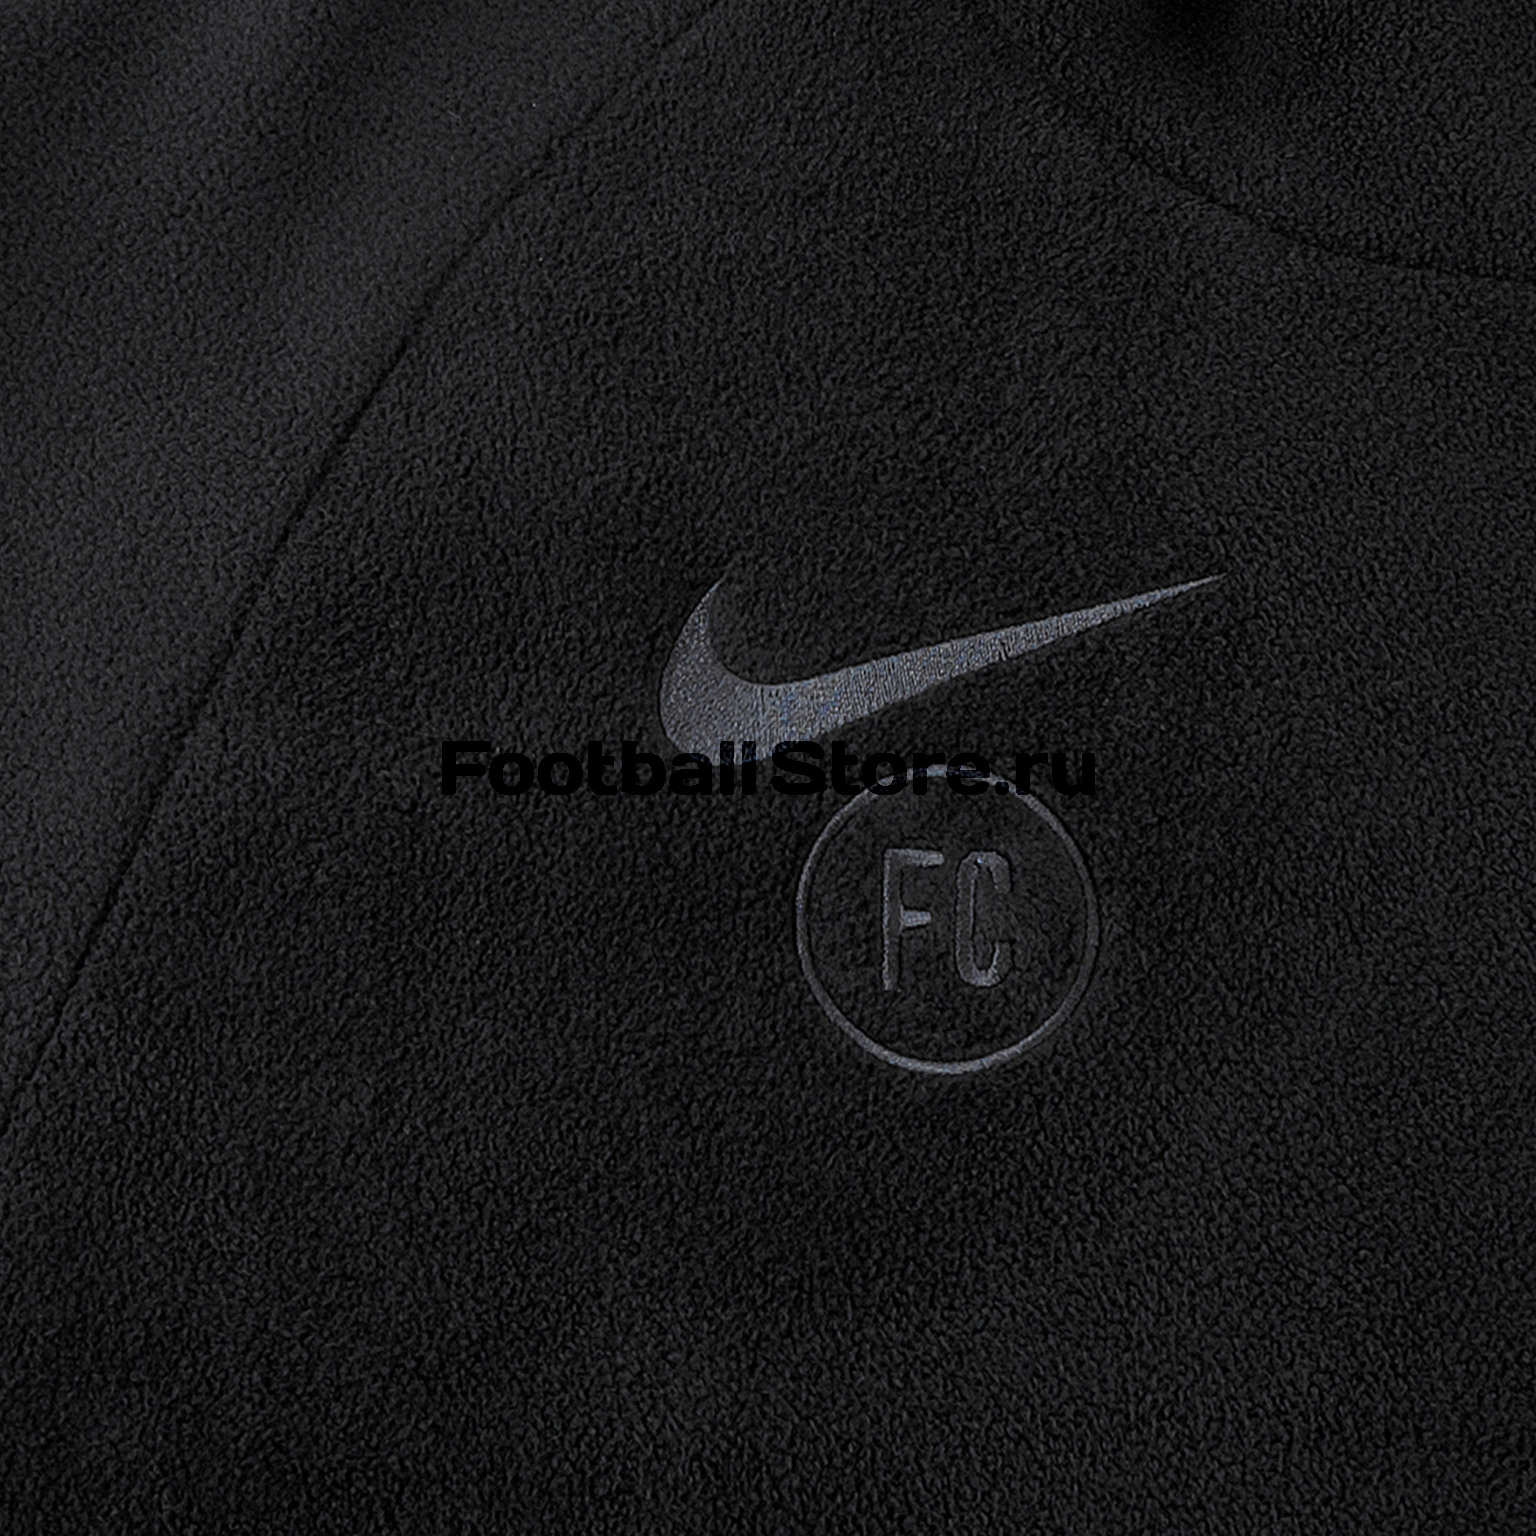 Толстовка Nike F.C. Dril Top AT6105-010